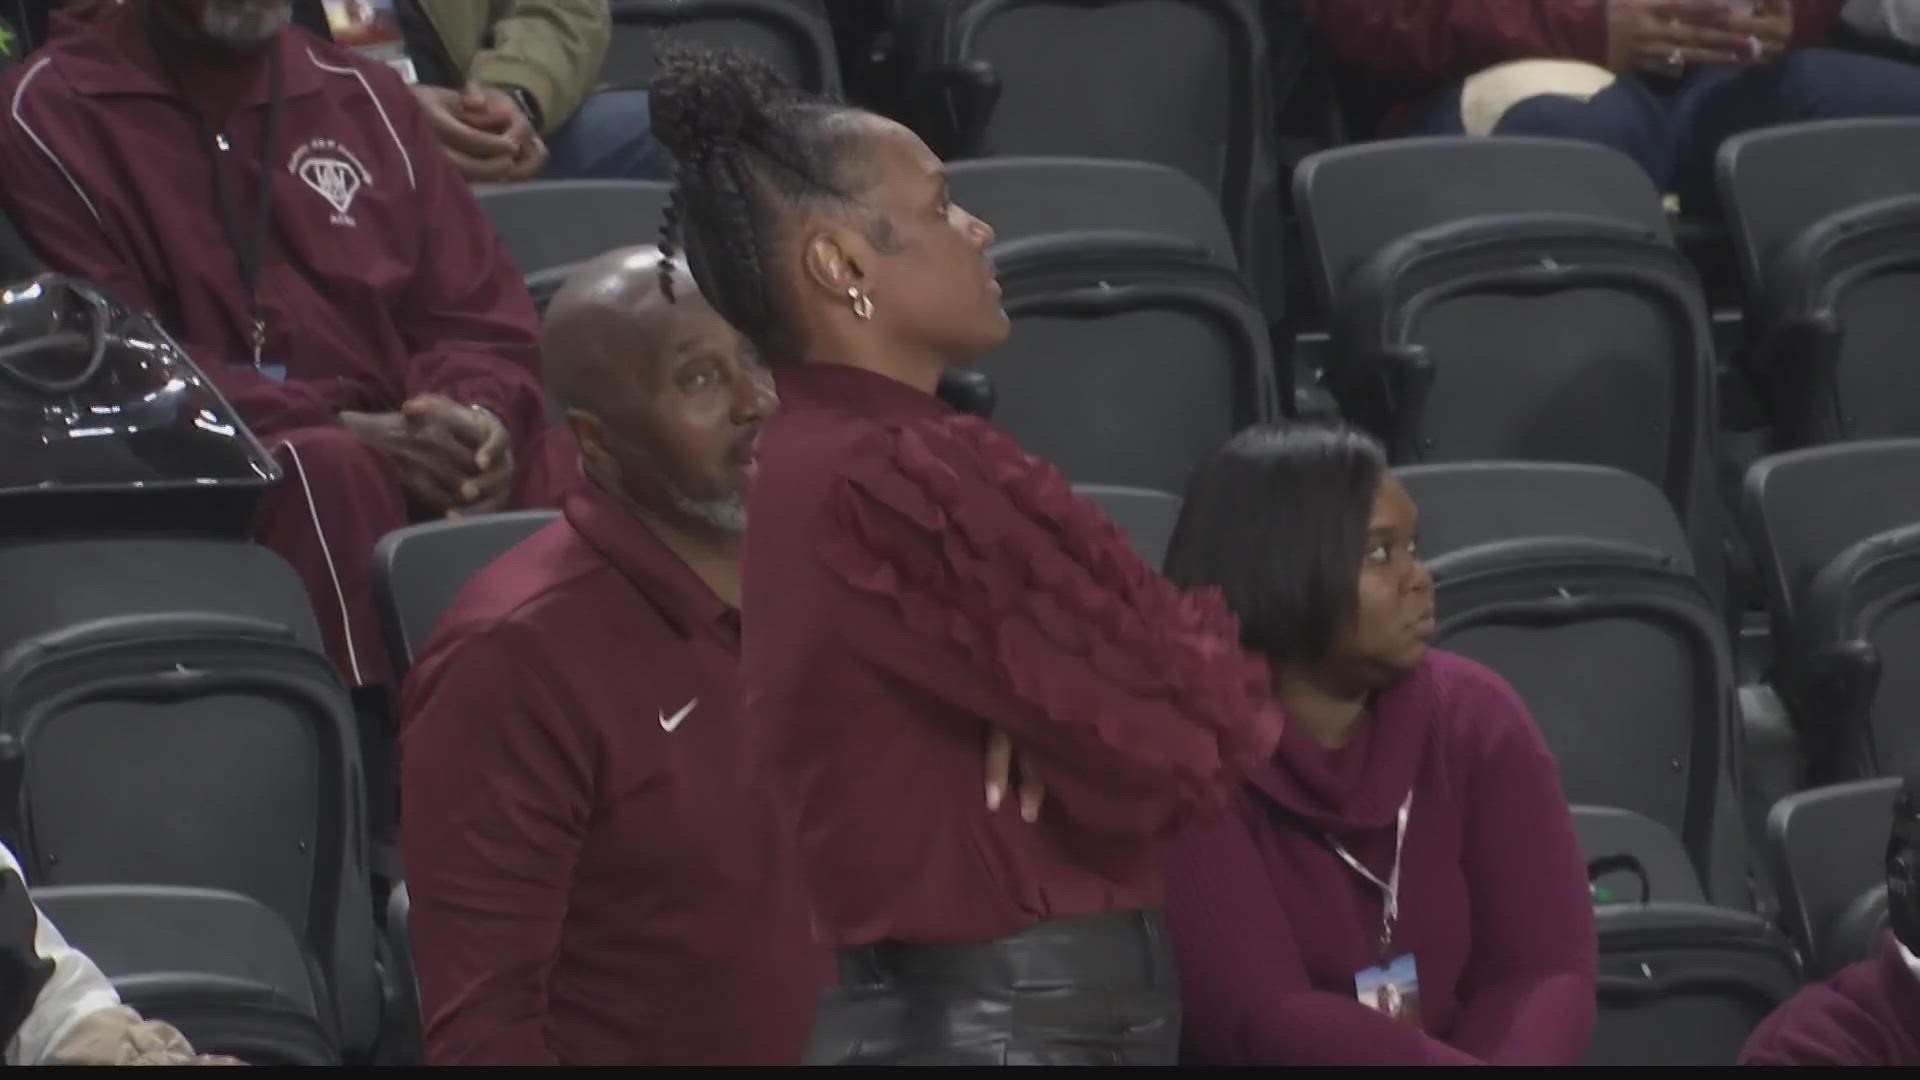 The AAMU women improved to 8-3 in SWAC play with a four point win over Grambling. The Bulldogs dropped to 5-6 in SWAC play with a six point loss to GSU.